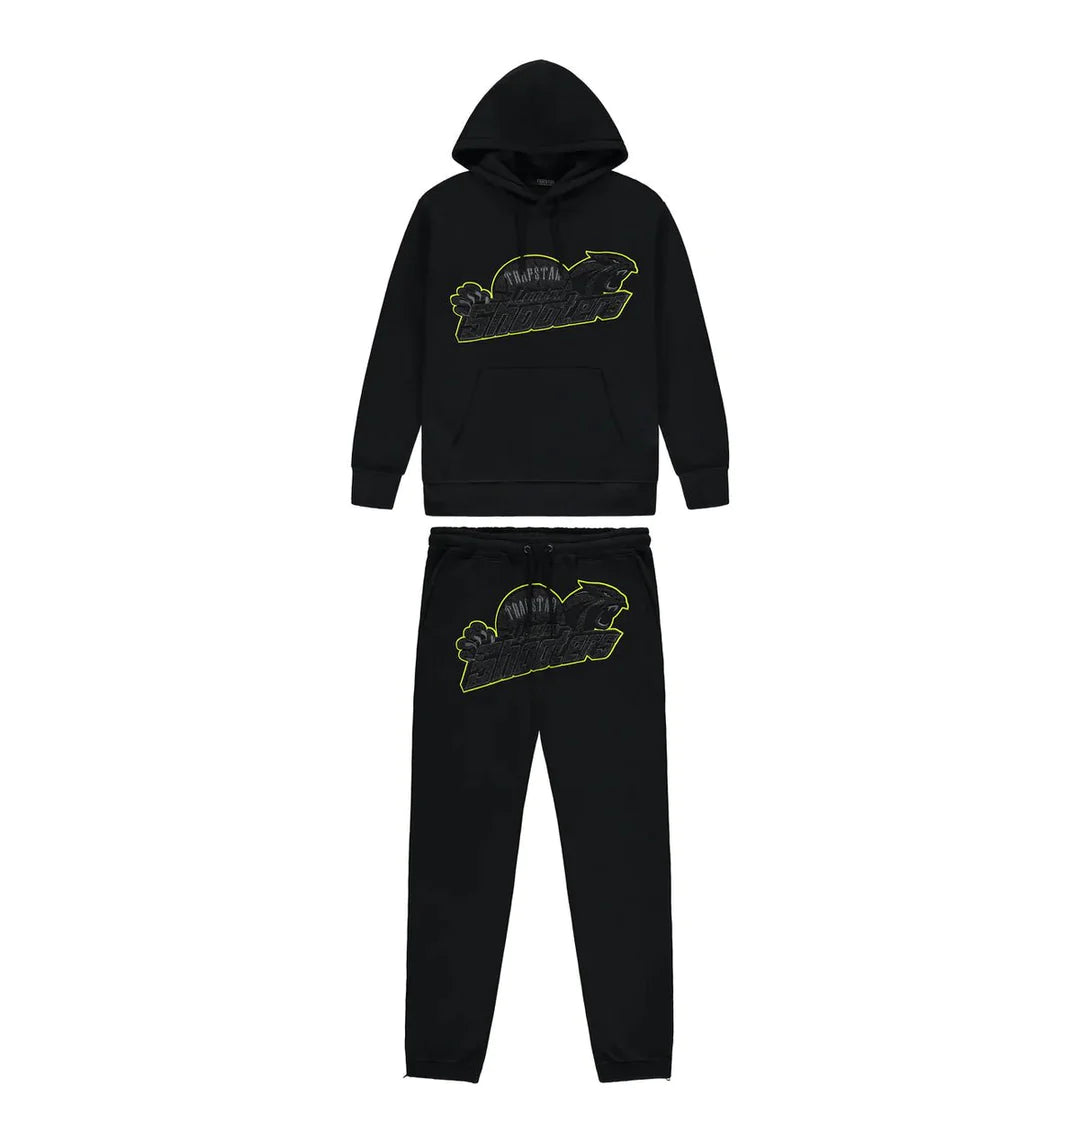 Trapstar Shooters Hooded Tracksuit - Black / Lime